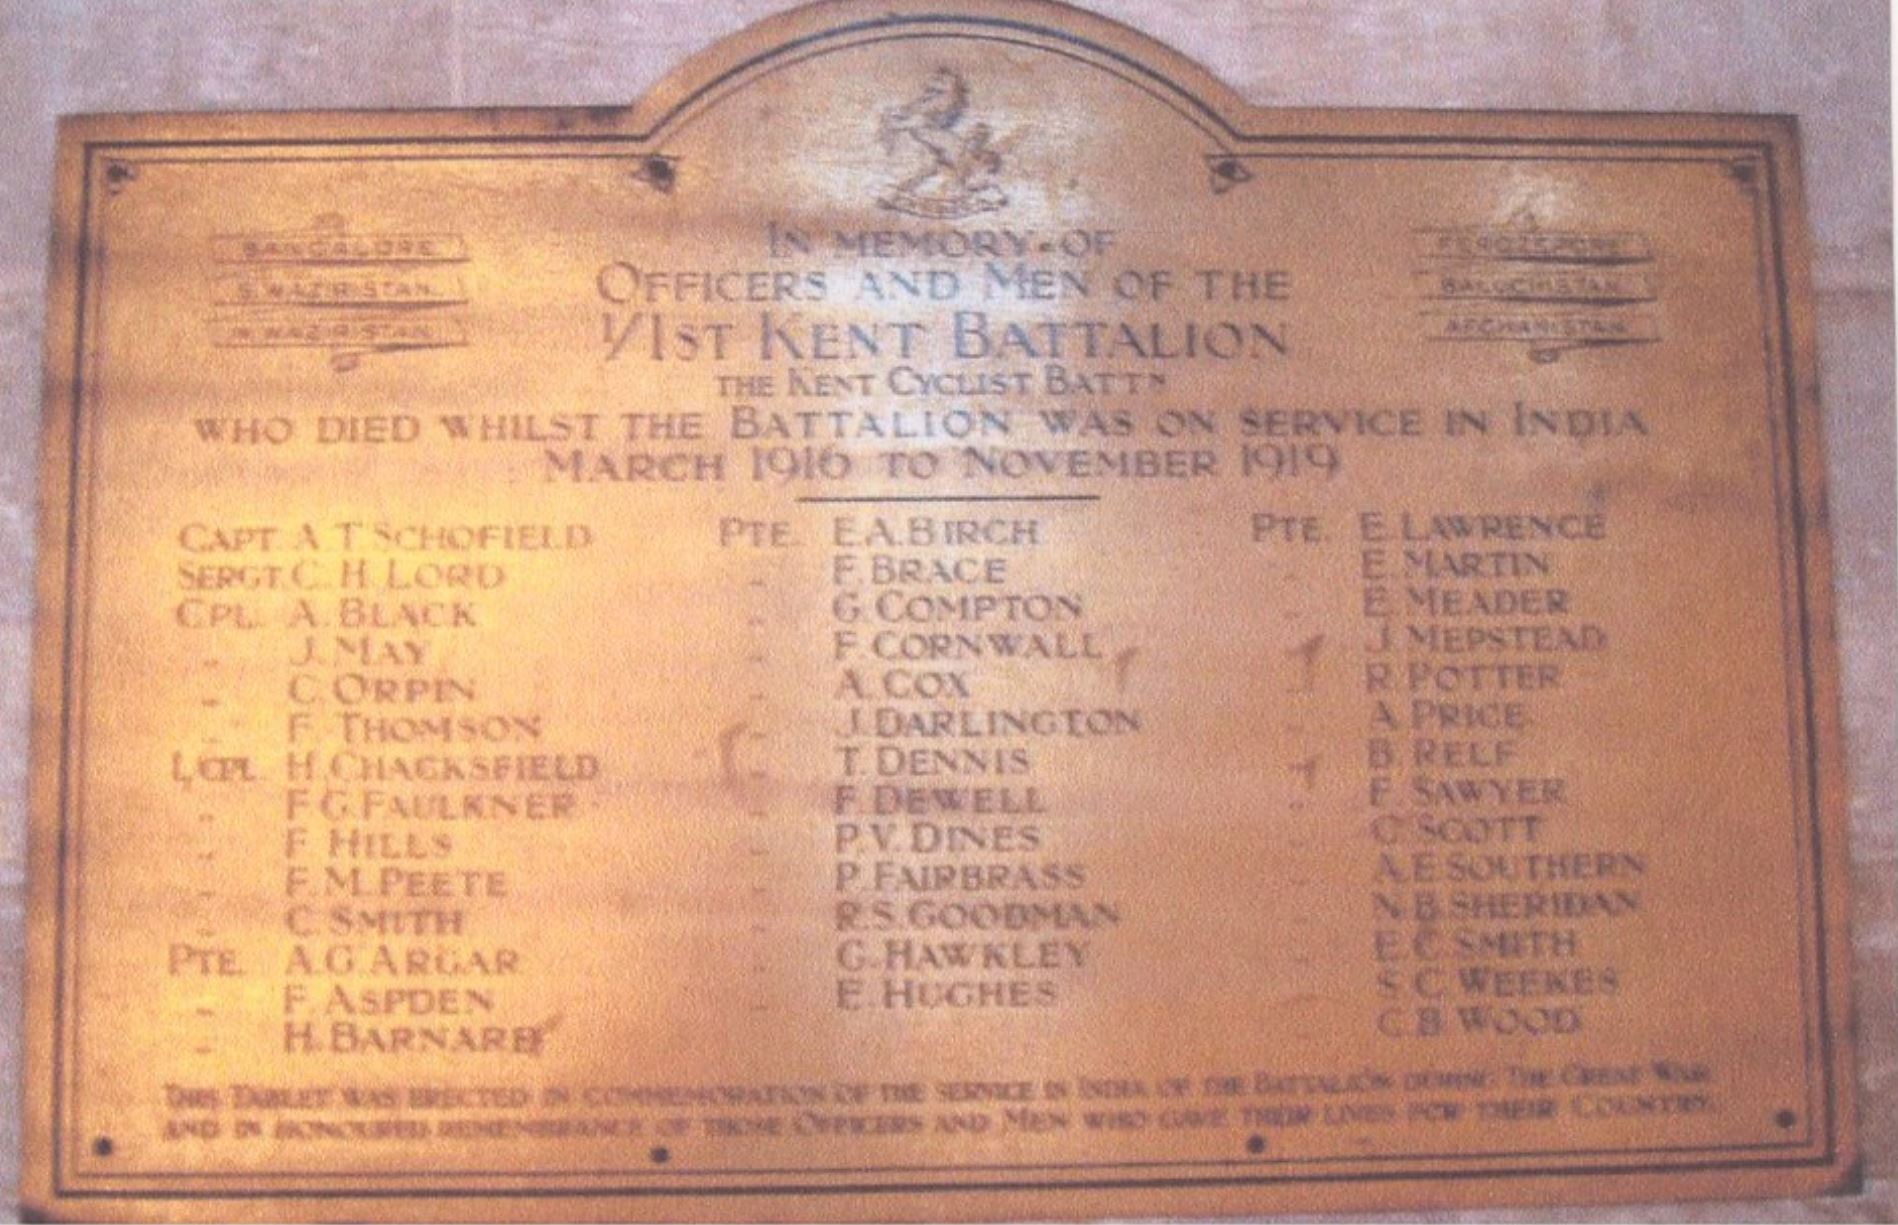 A plaque in Canterbury Cathedral records the losses of the 1st Kent Battalion.